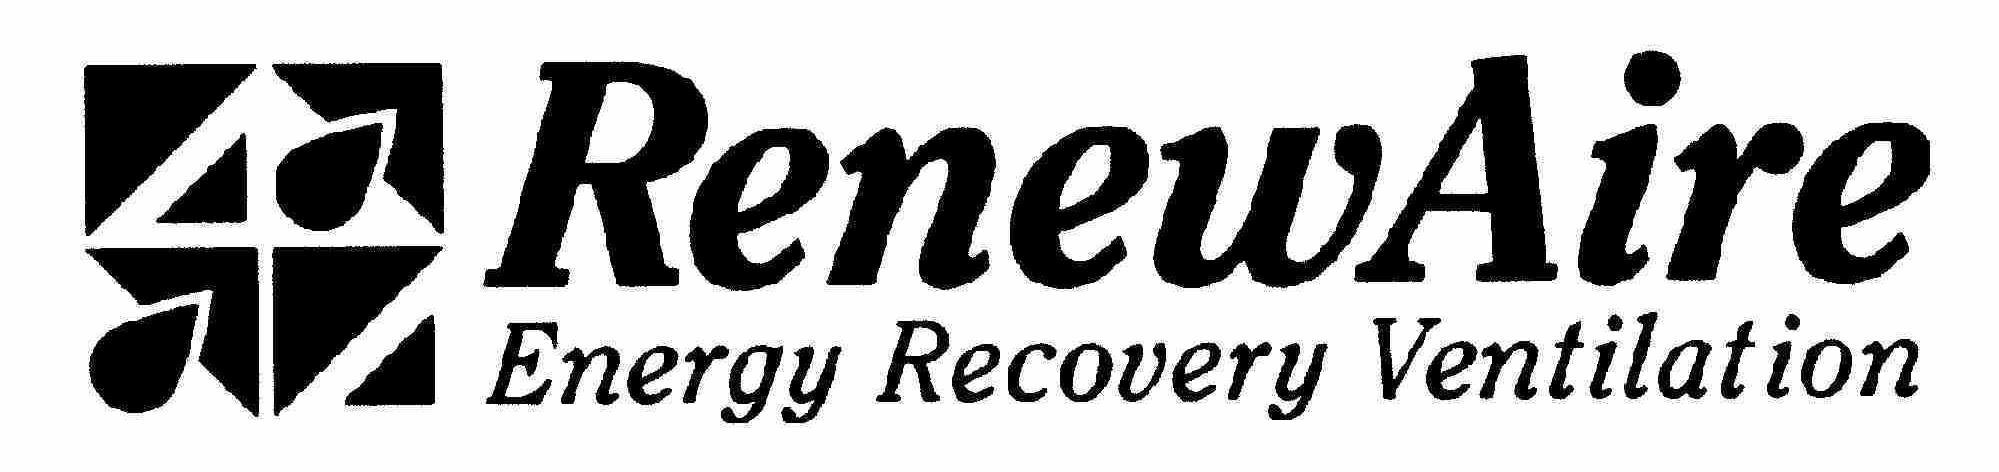  RENEWAIRE ENERGY RECOVERY VENTILATION